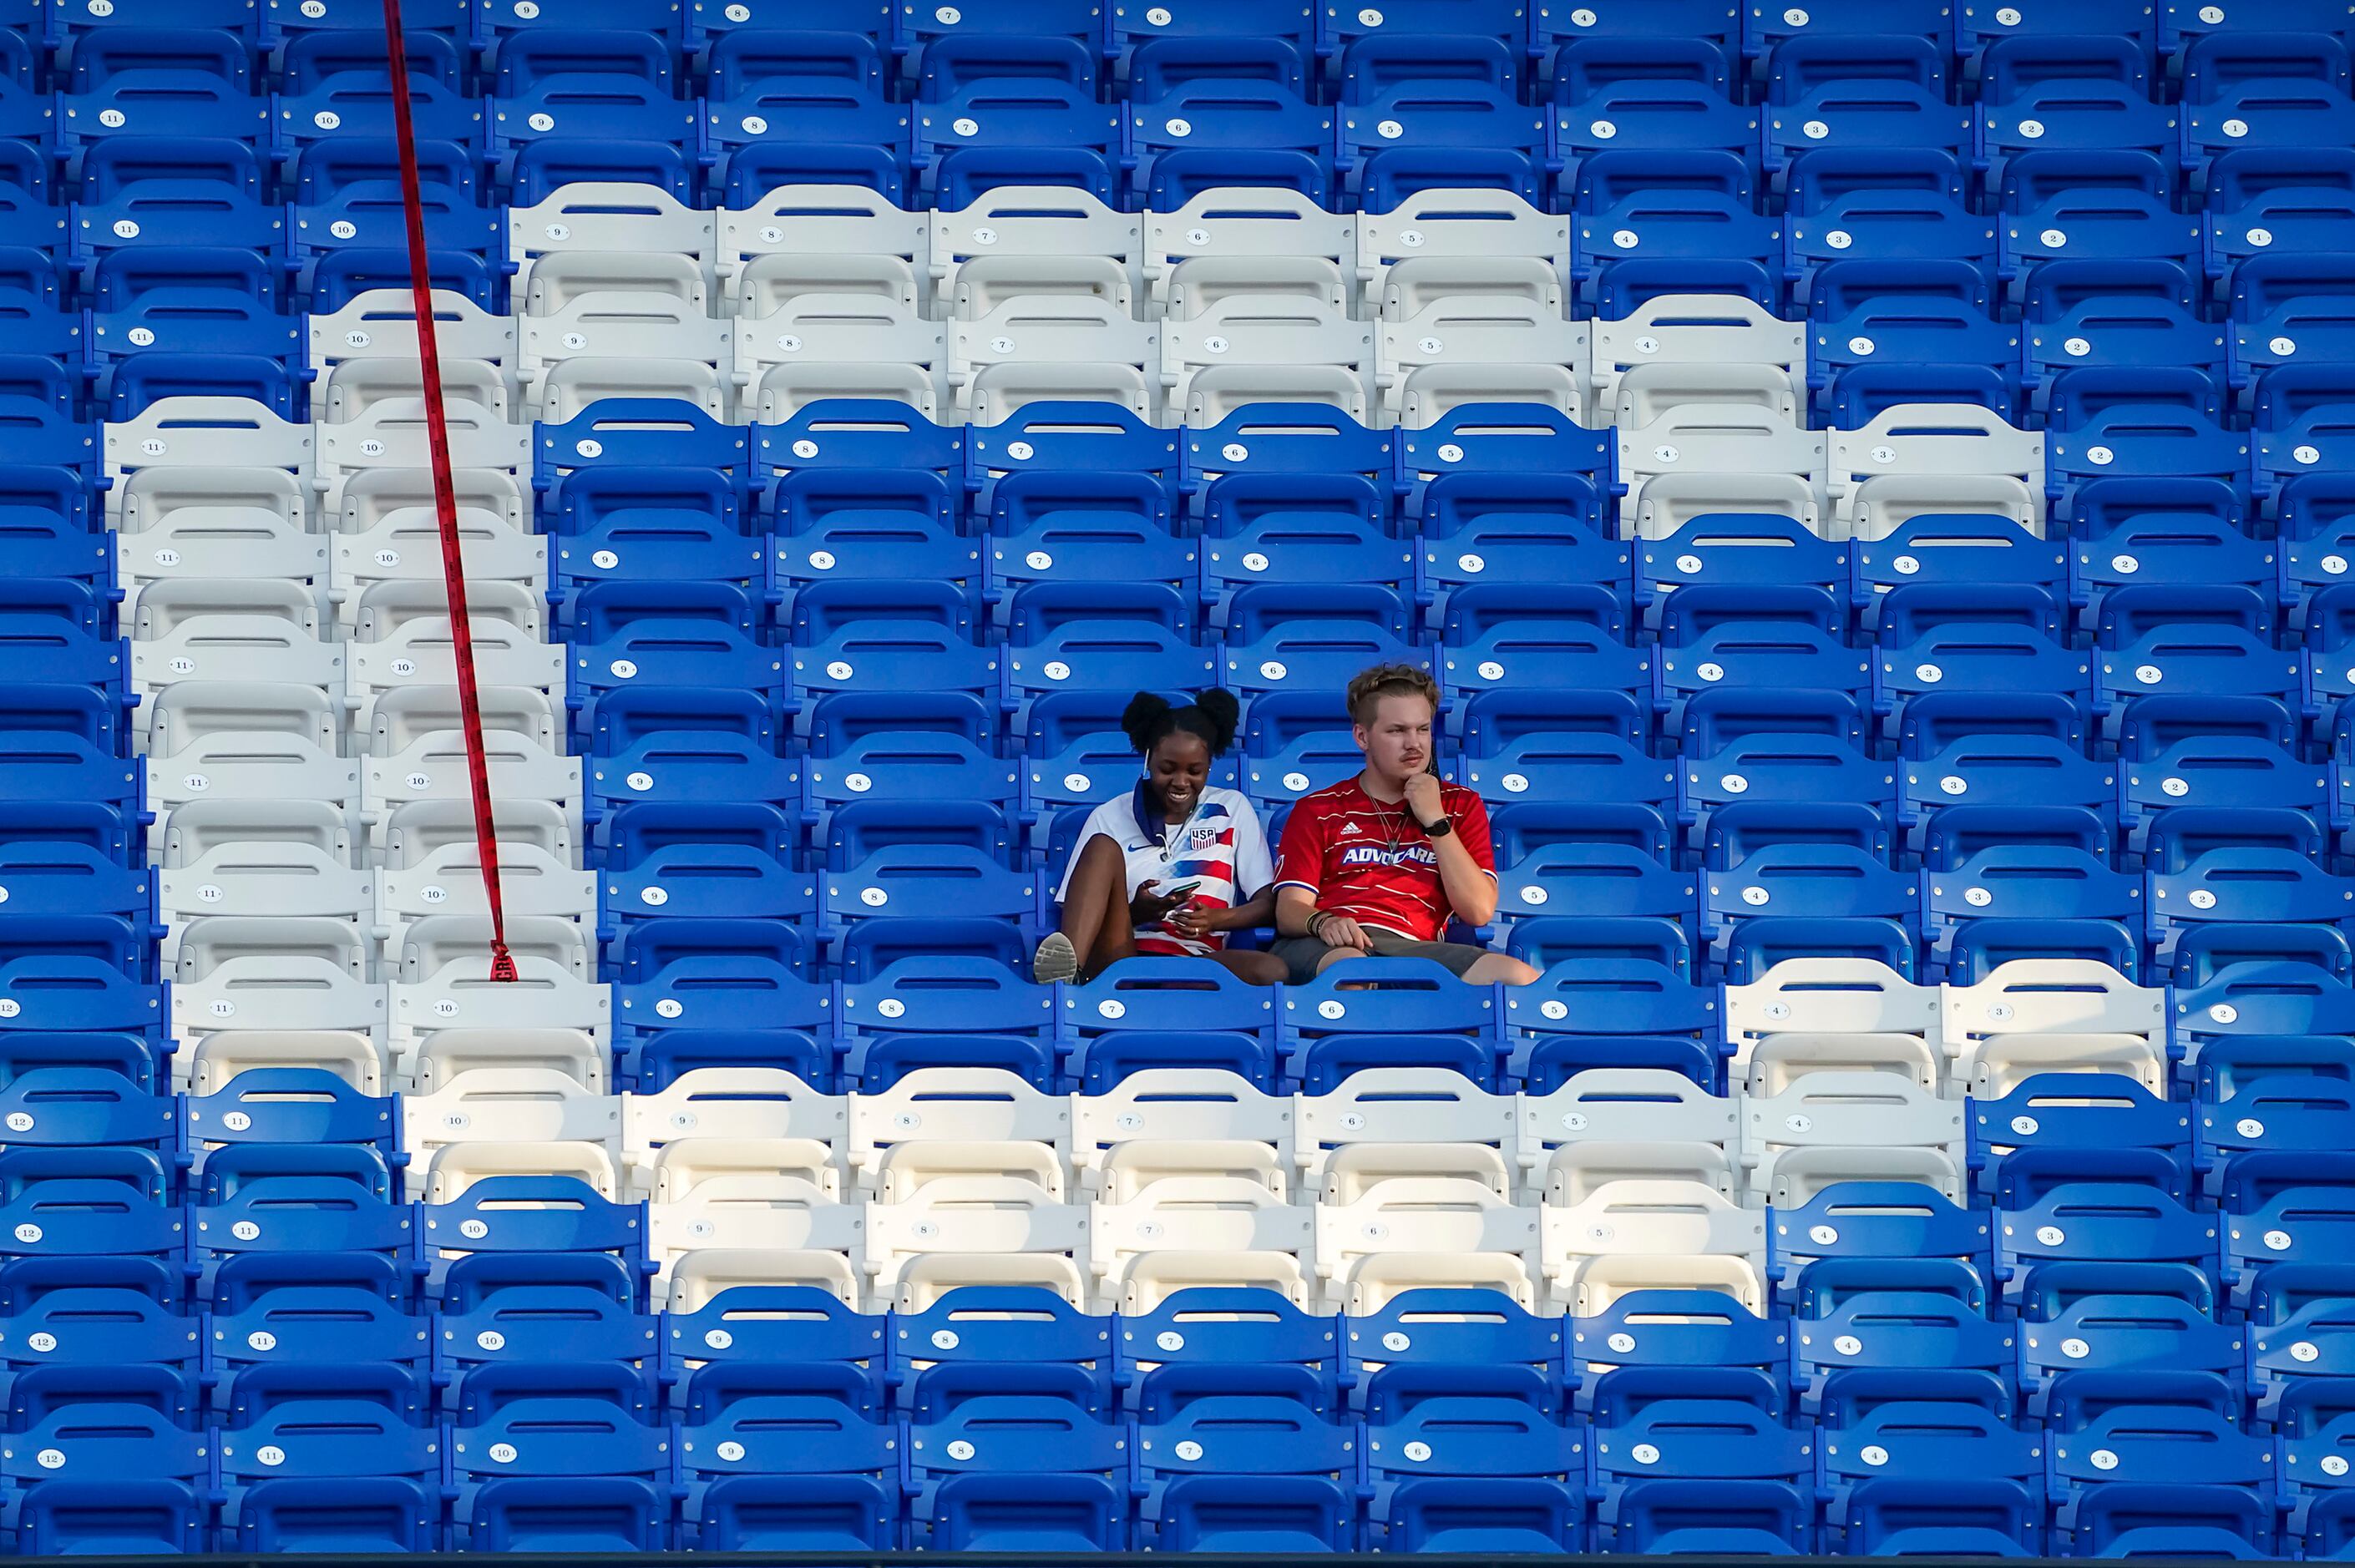 Fans sit in the middle of the ÔCÕ in FC Dallas during the first half of an MLS soccer game...